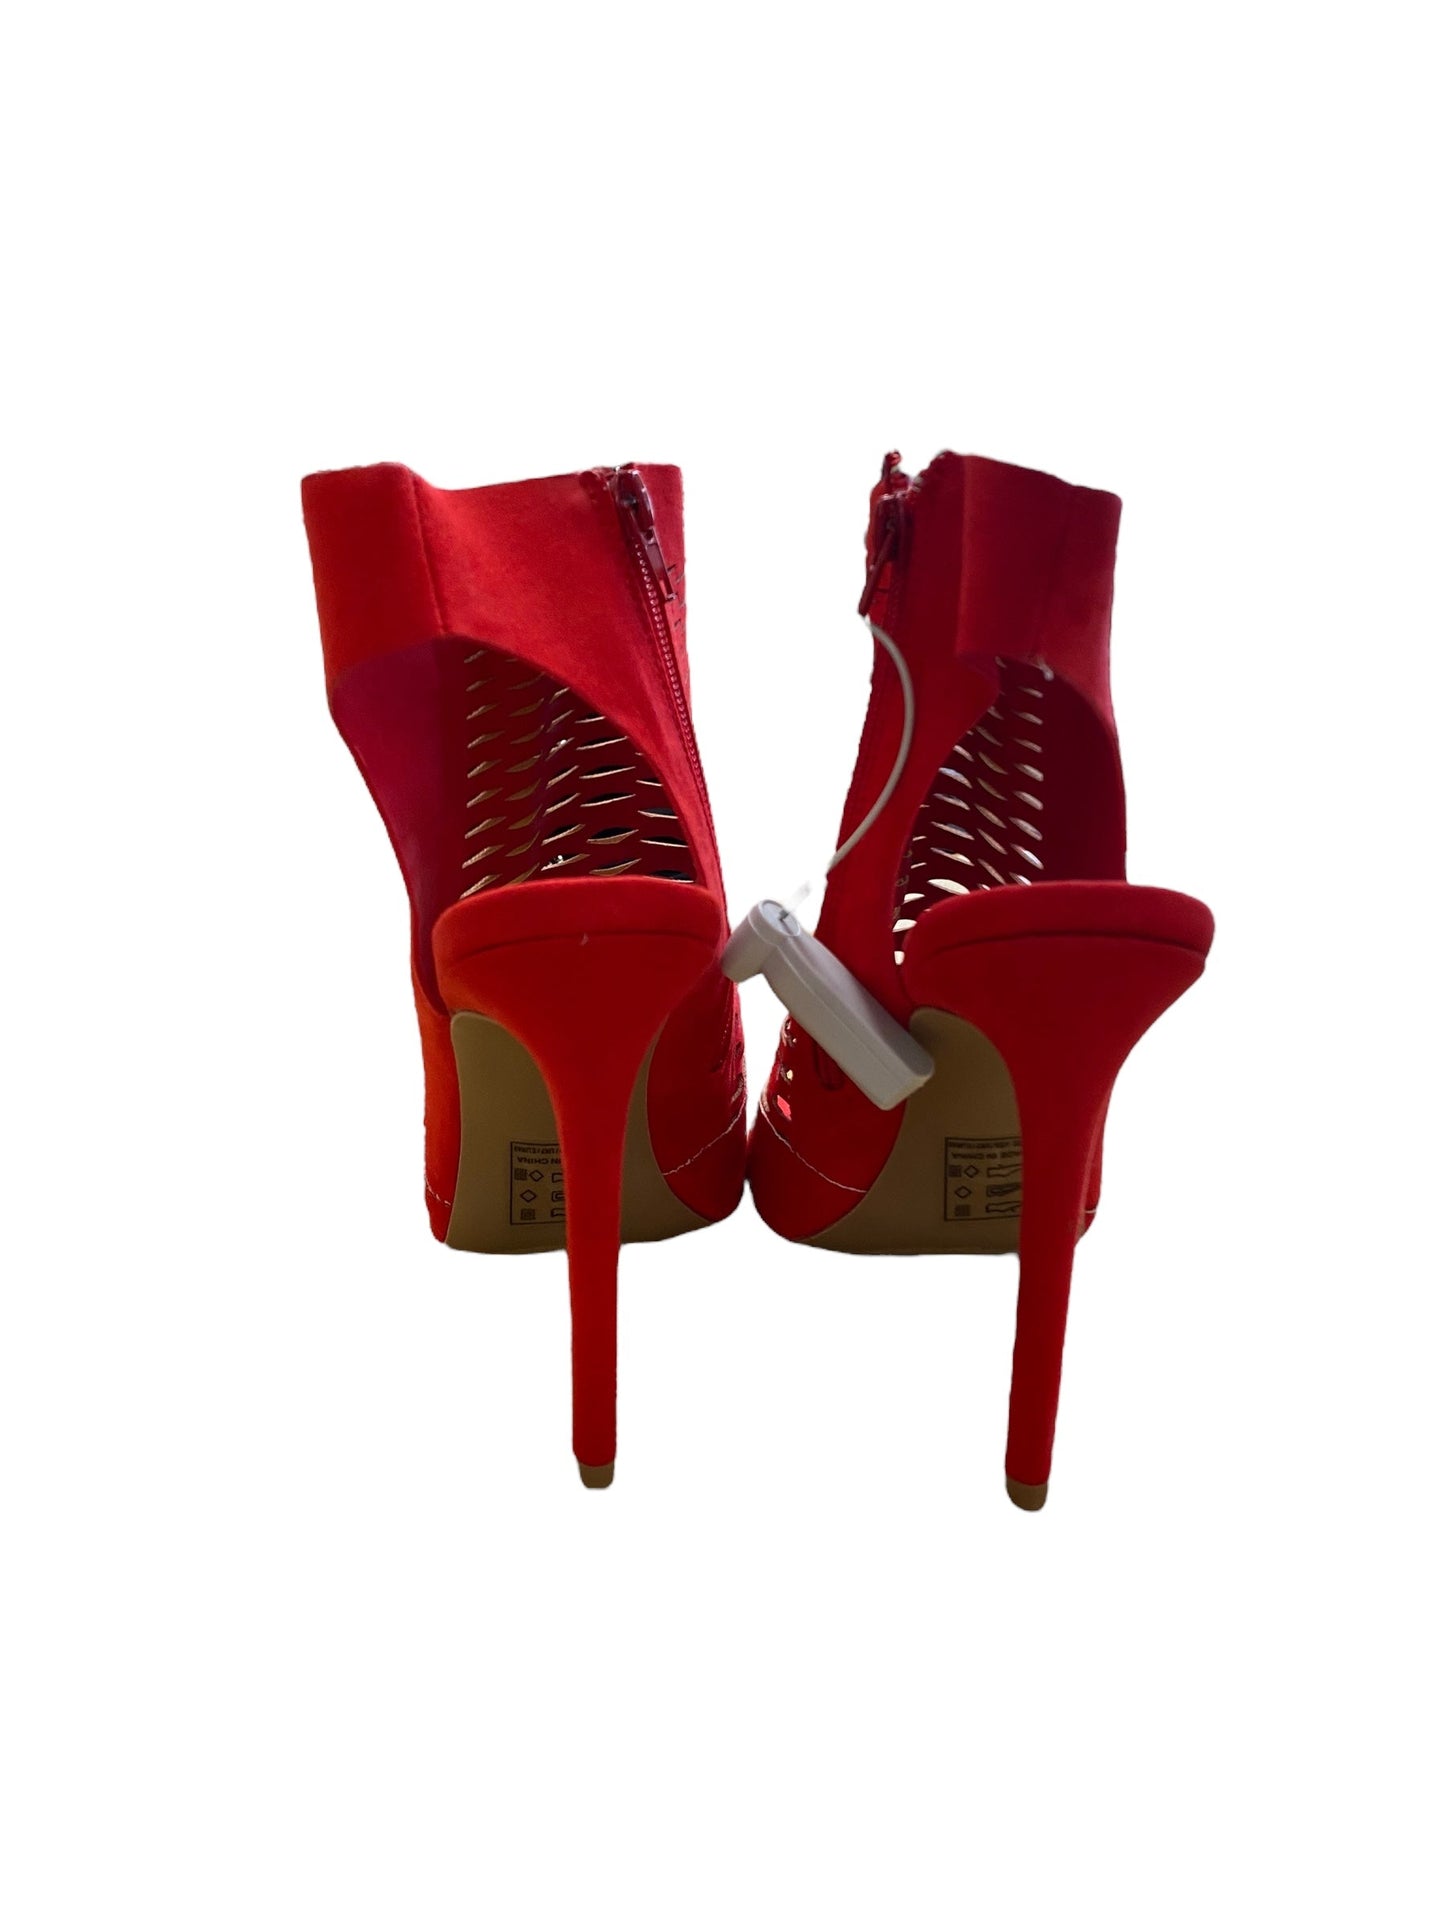 Red Shoes Heels Stiletto Qupid, Size 9